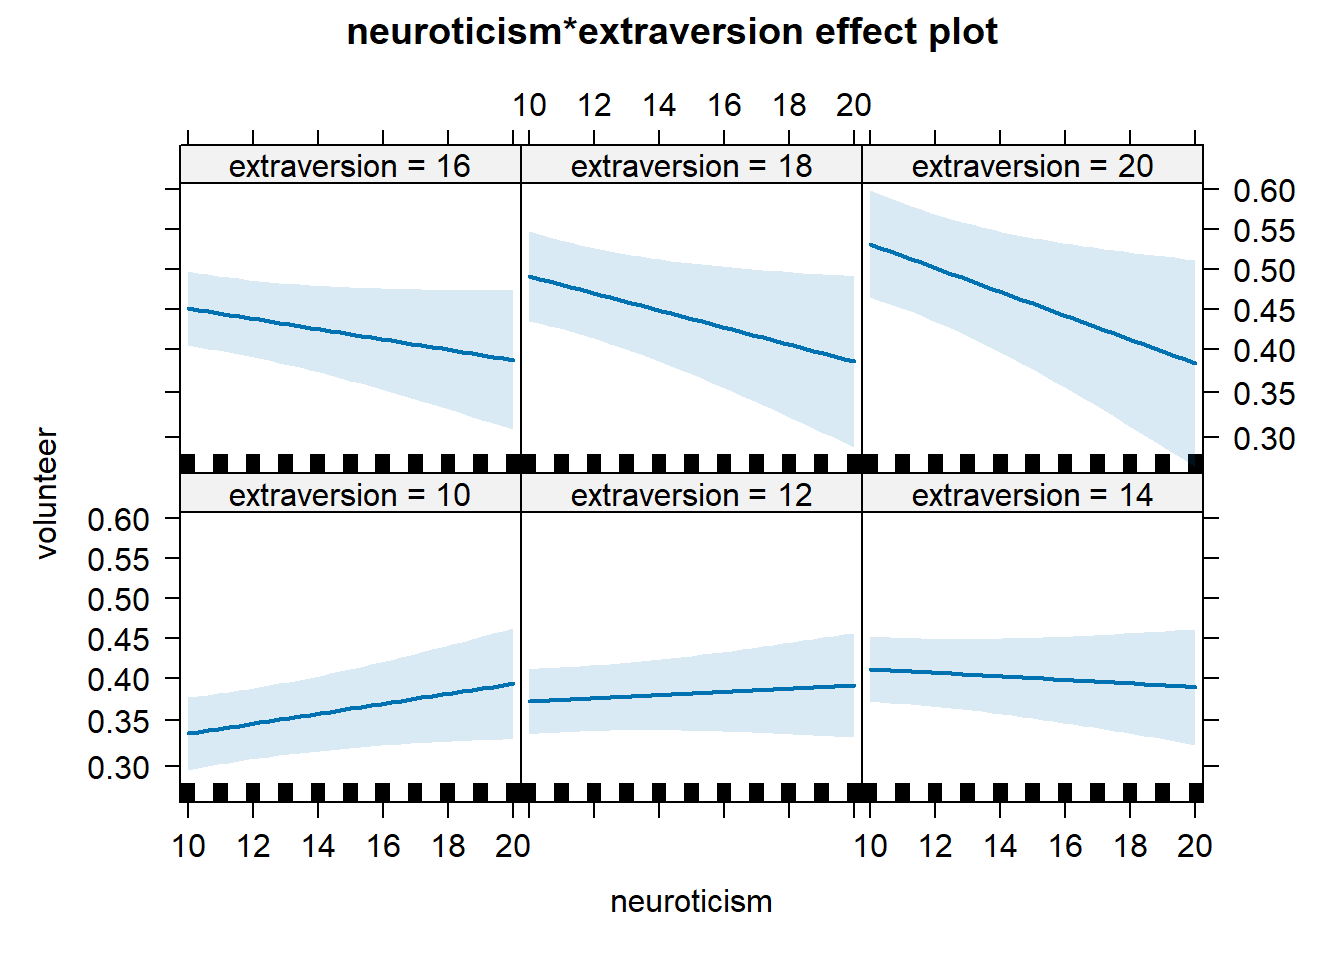 Effect plot showing predicted probability for volunteering over the range of plausible neuroticism values conditioned on six different values of extraversion.